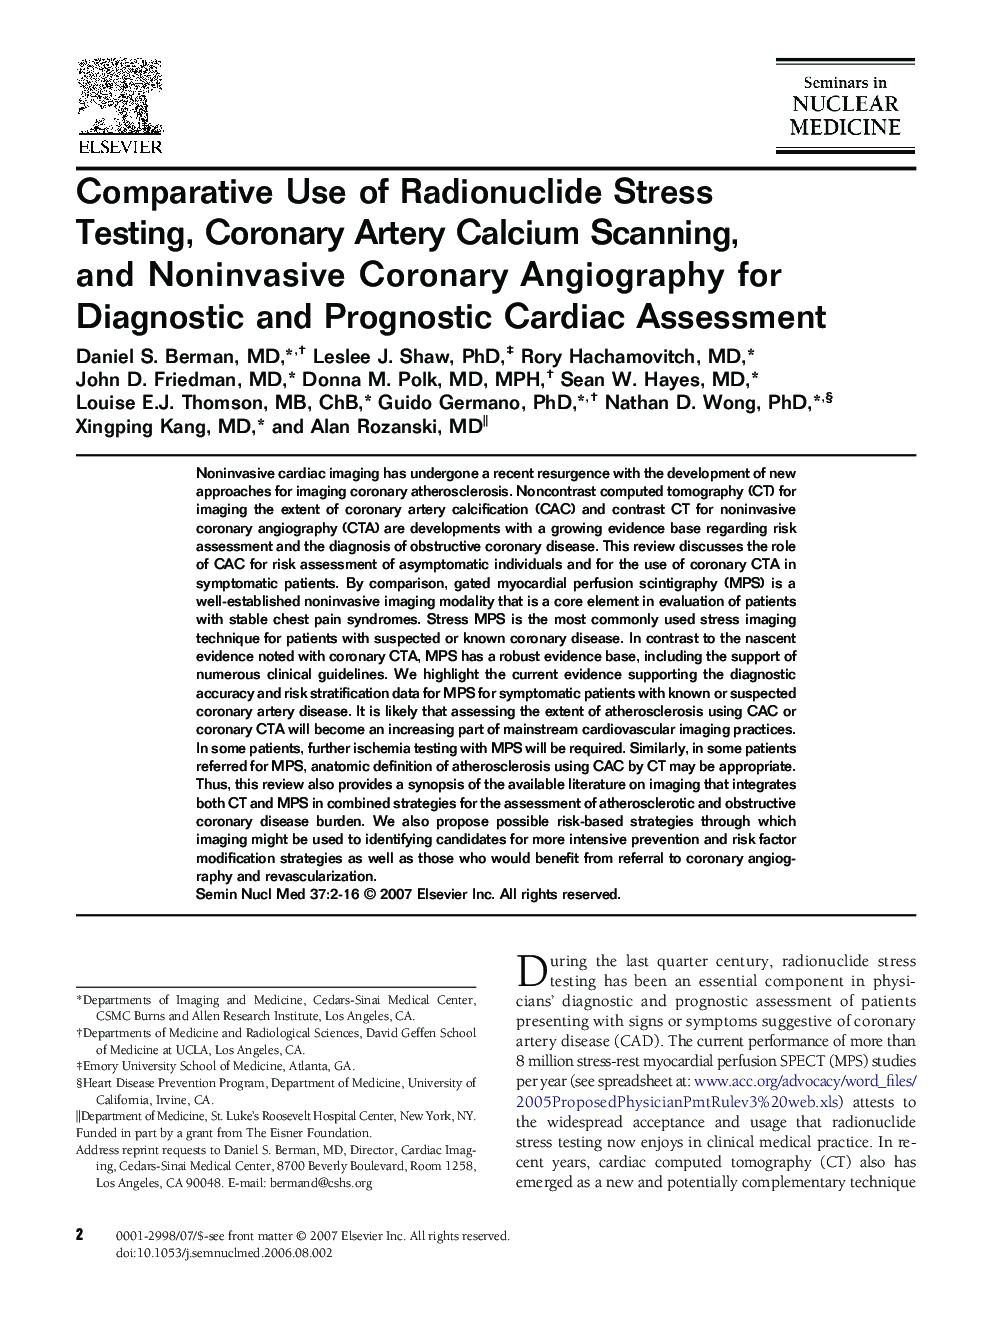 Comparative Use of Radionuclide Stress Testing, Coronary Artery Calcium Scanning, and Noninvasive Coronary Angiography for Diagnostic and Prognostic Cardiac Assessment 